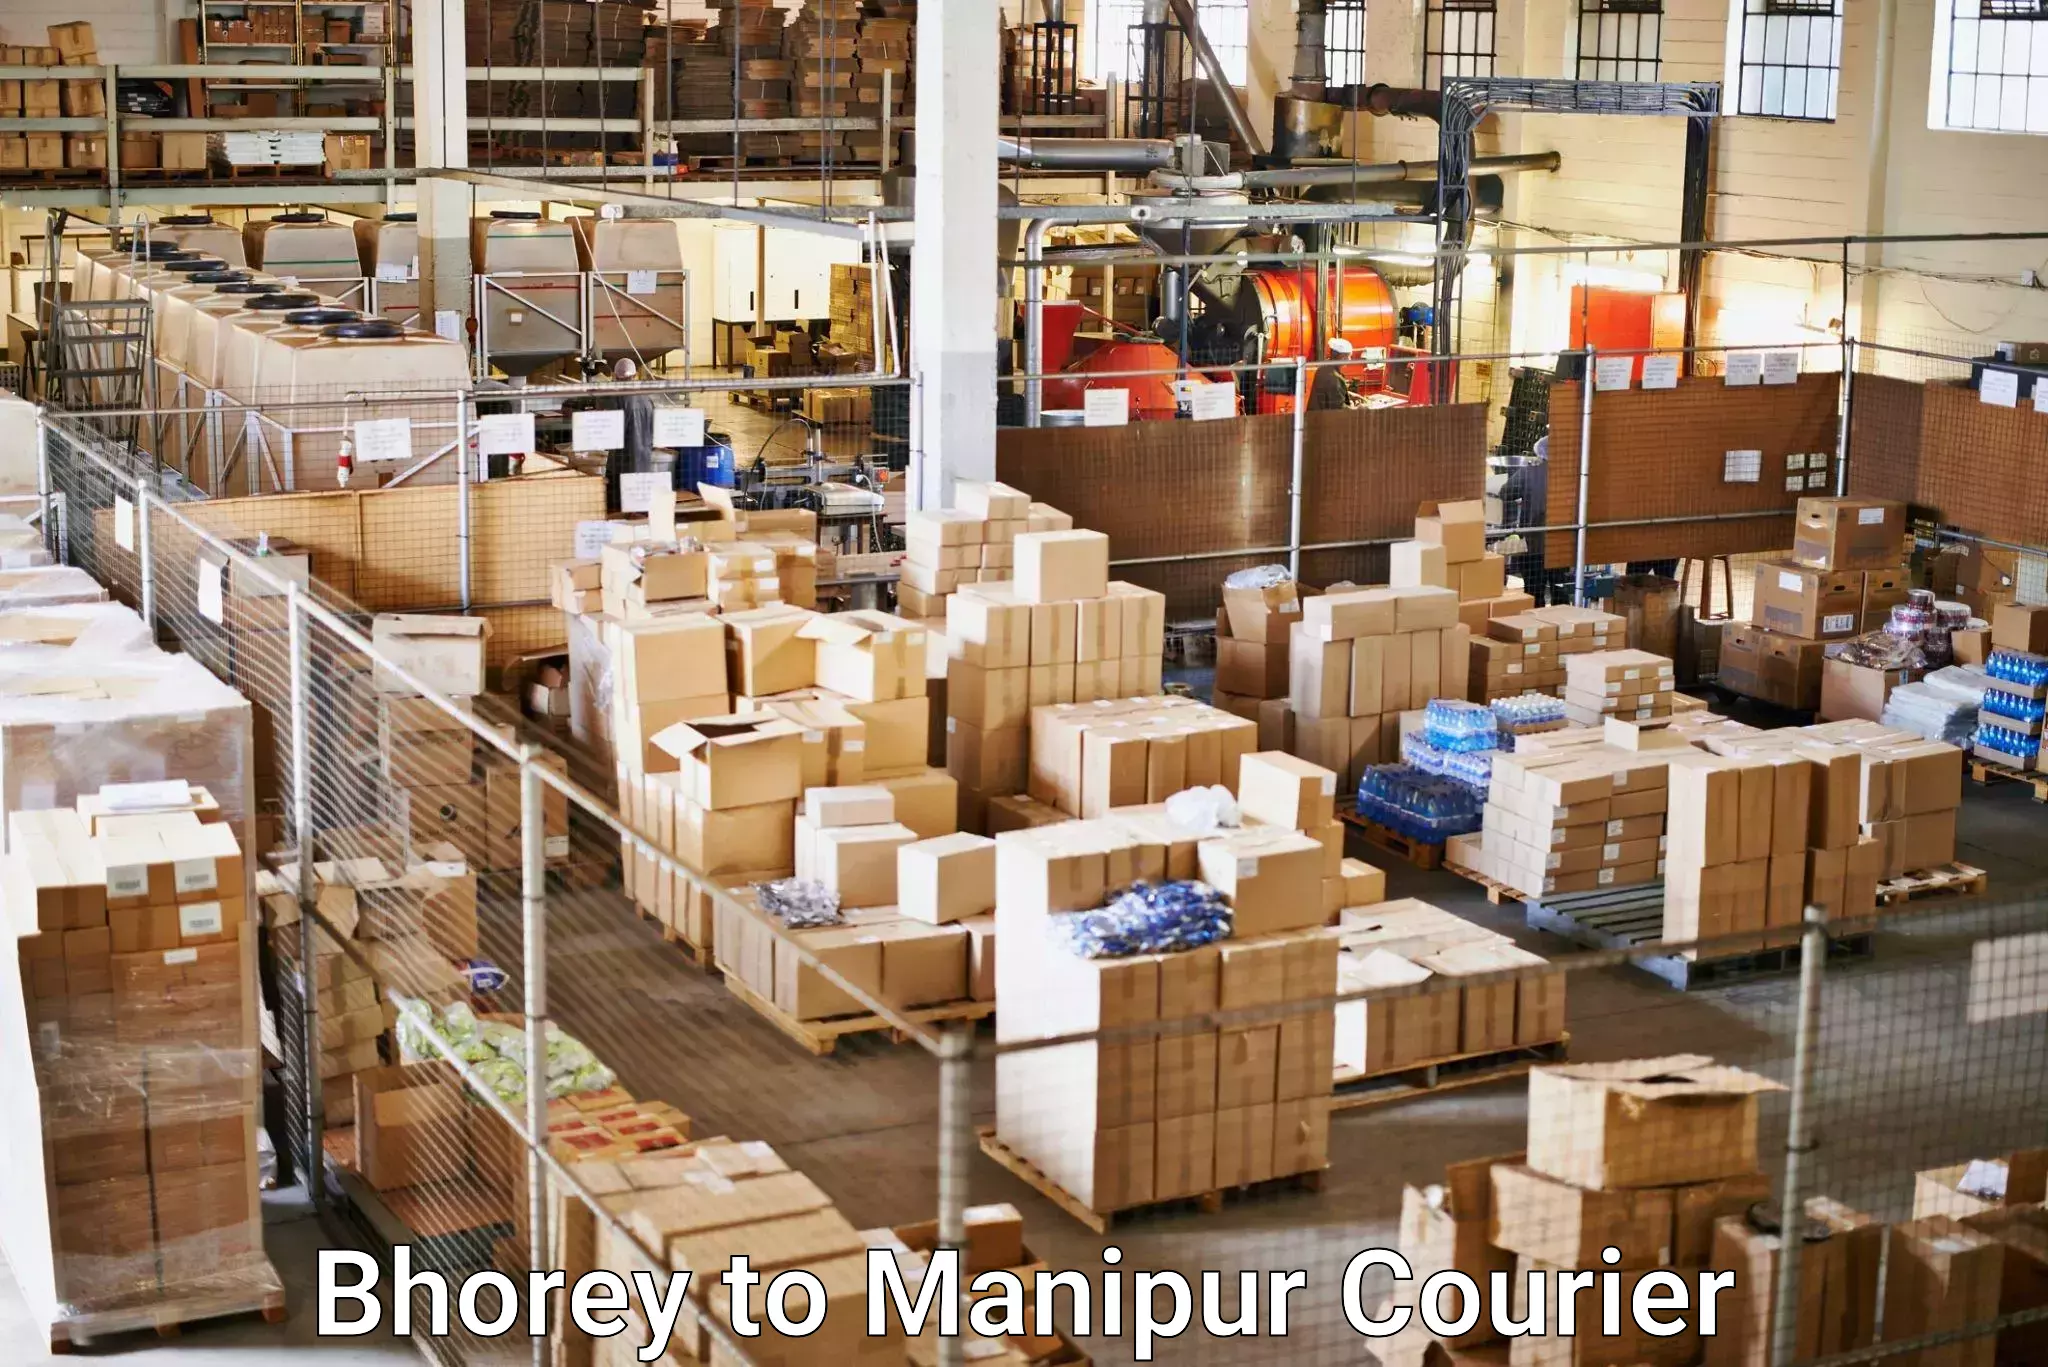 Professional delivery solutions Bhorey to Moirang